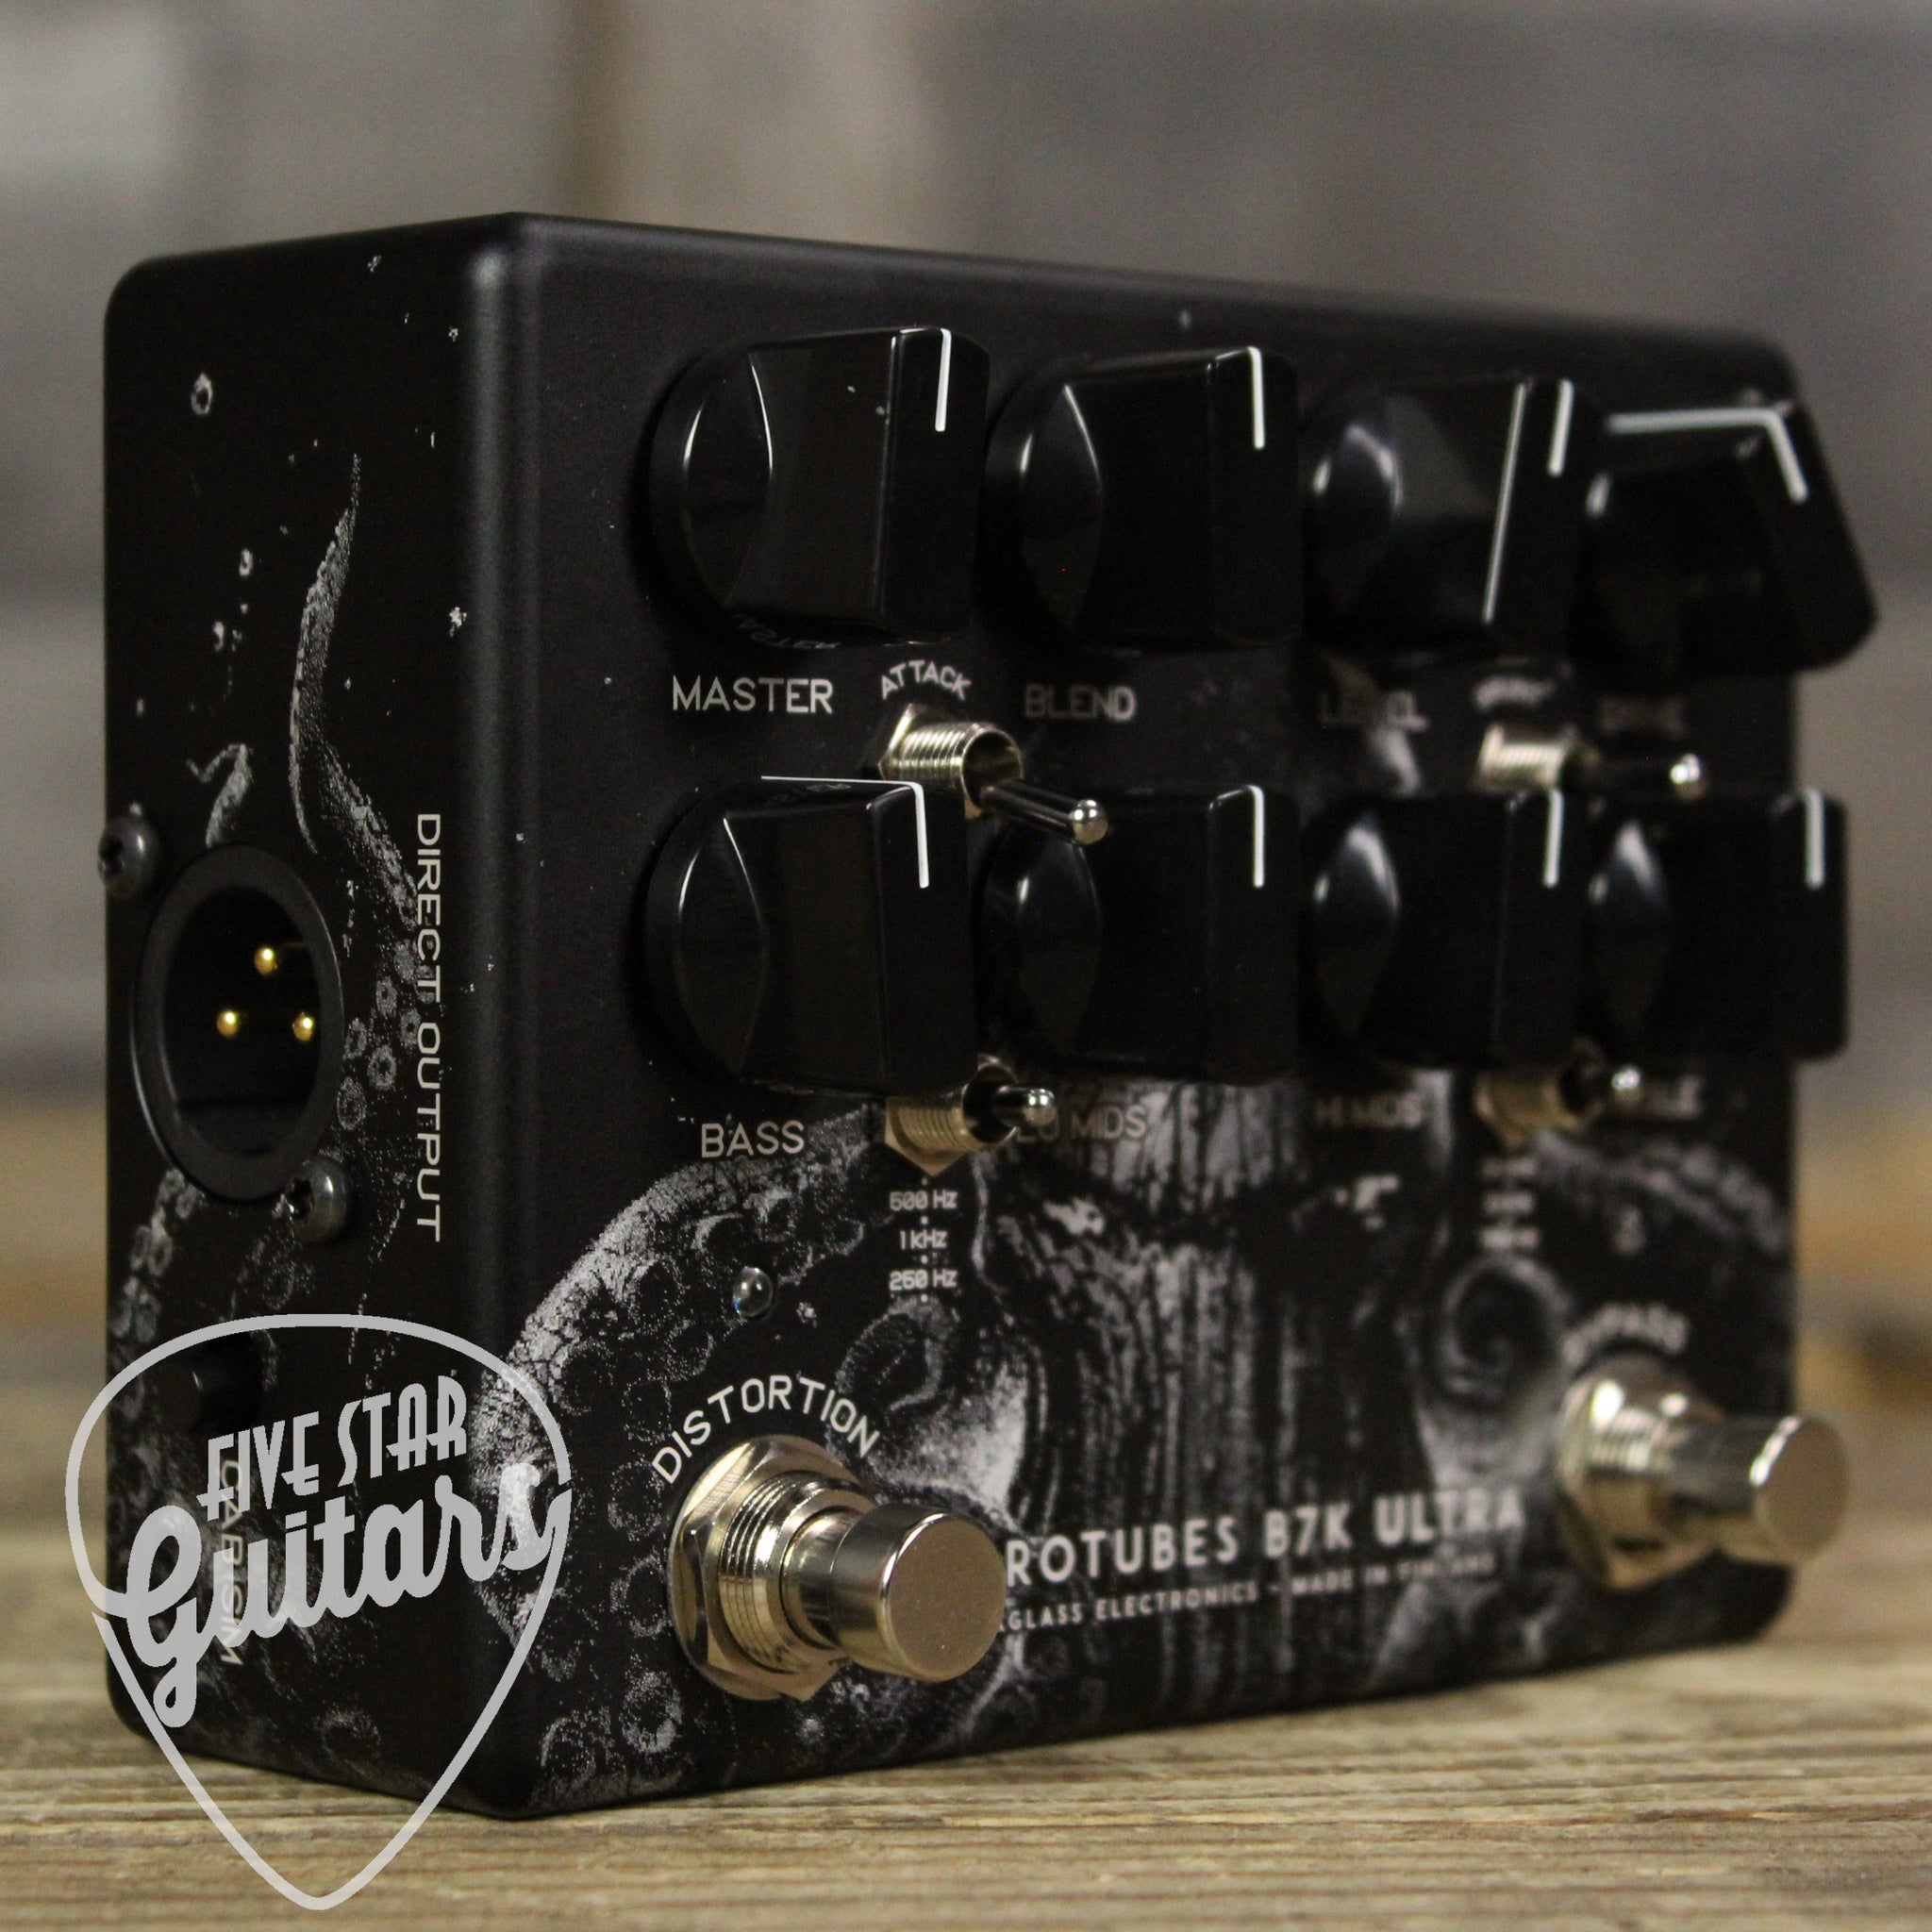 Darkglass MicroTubes B7K ULTRA V2 “THE SQUID” Limited Edition - Five